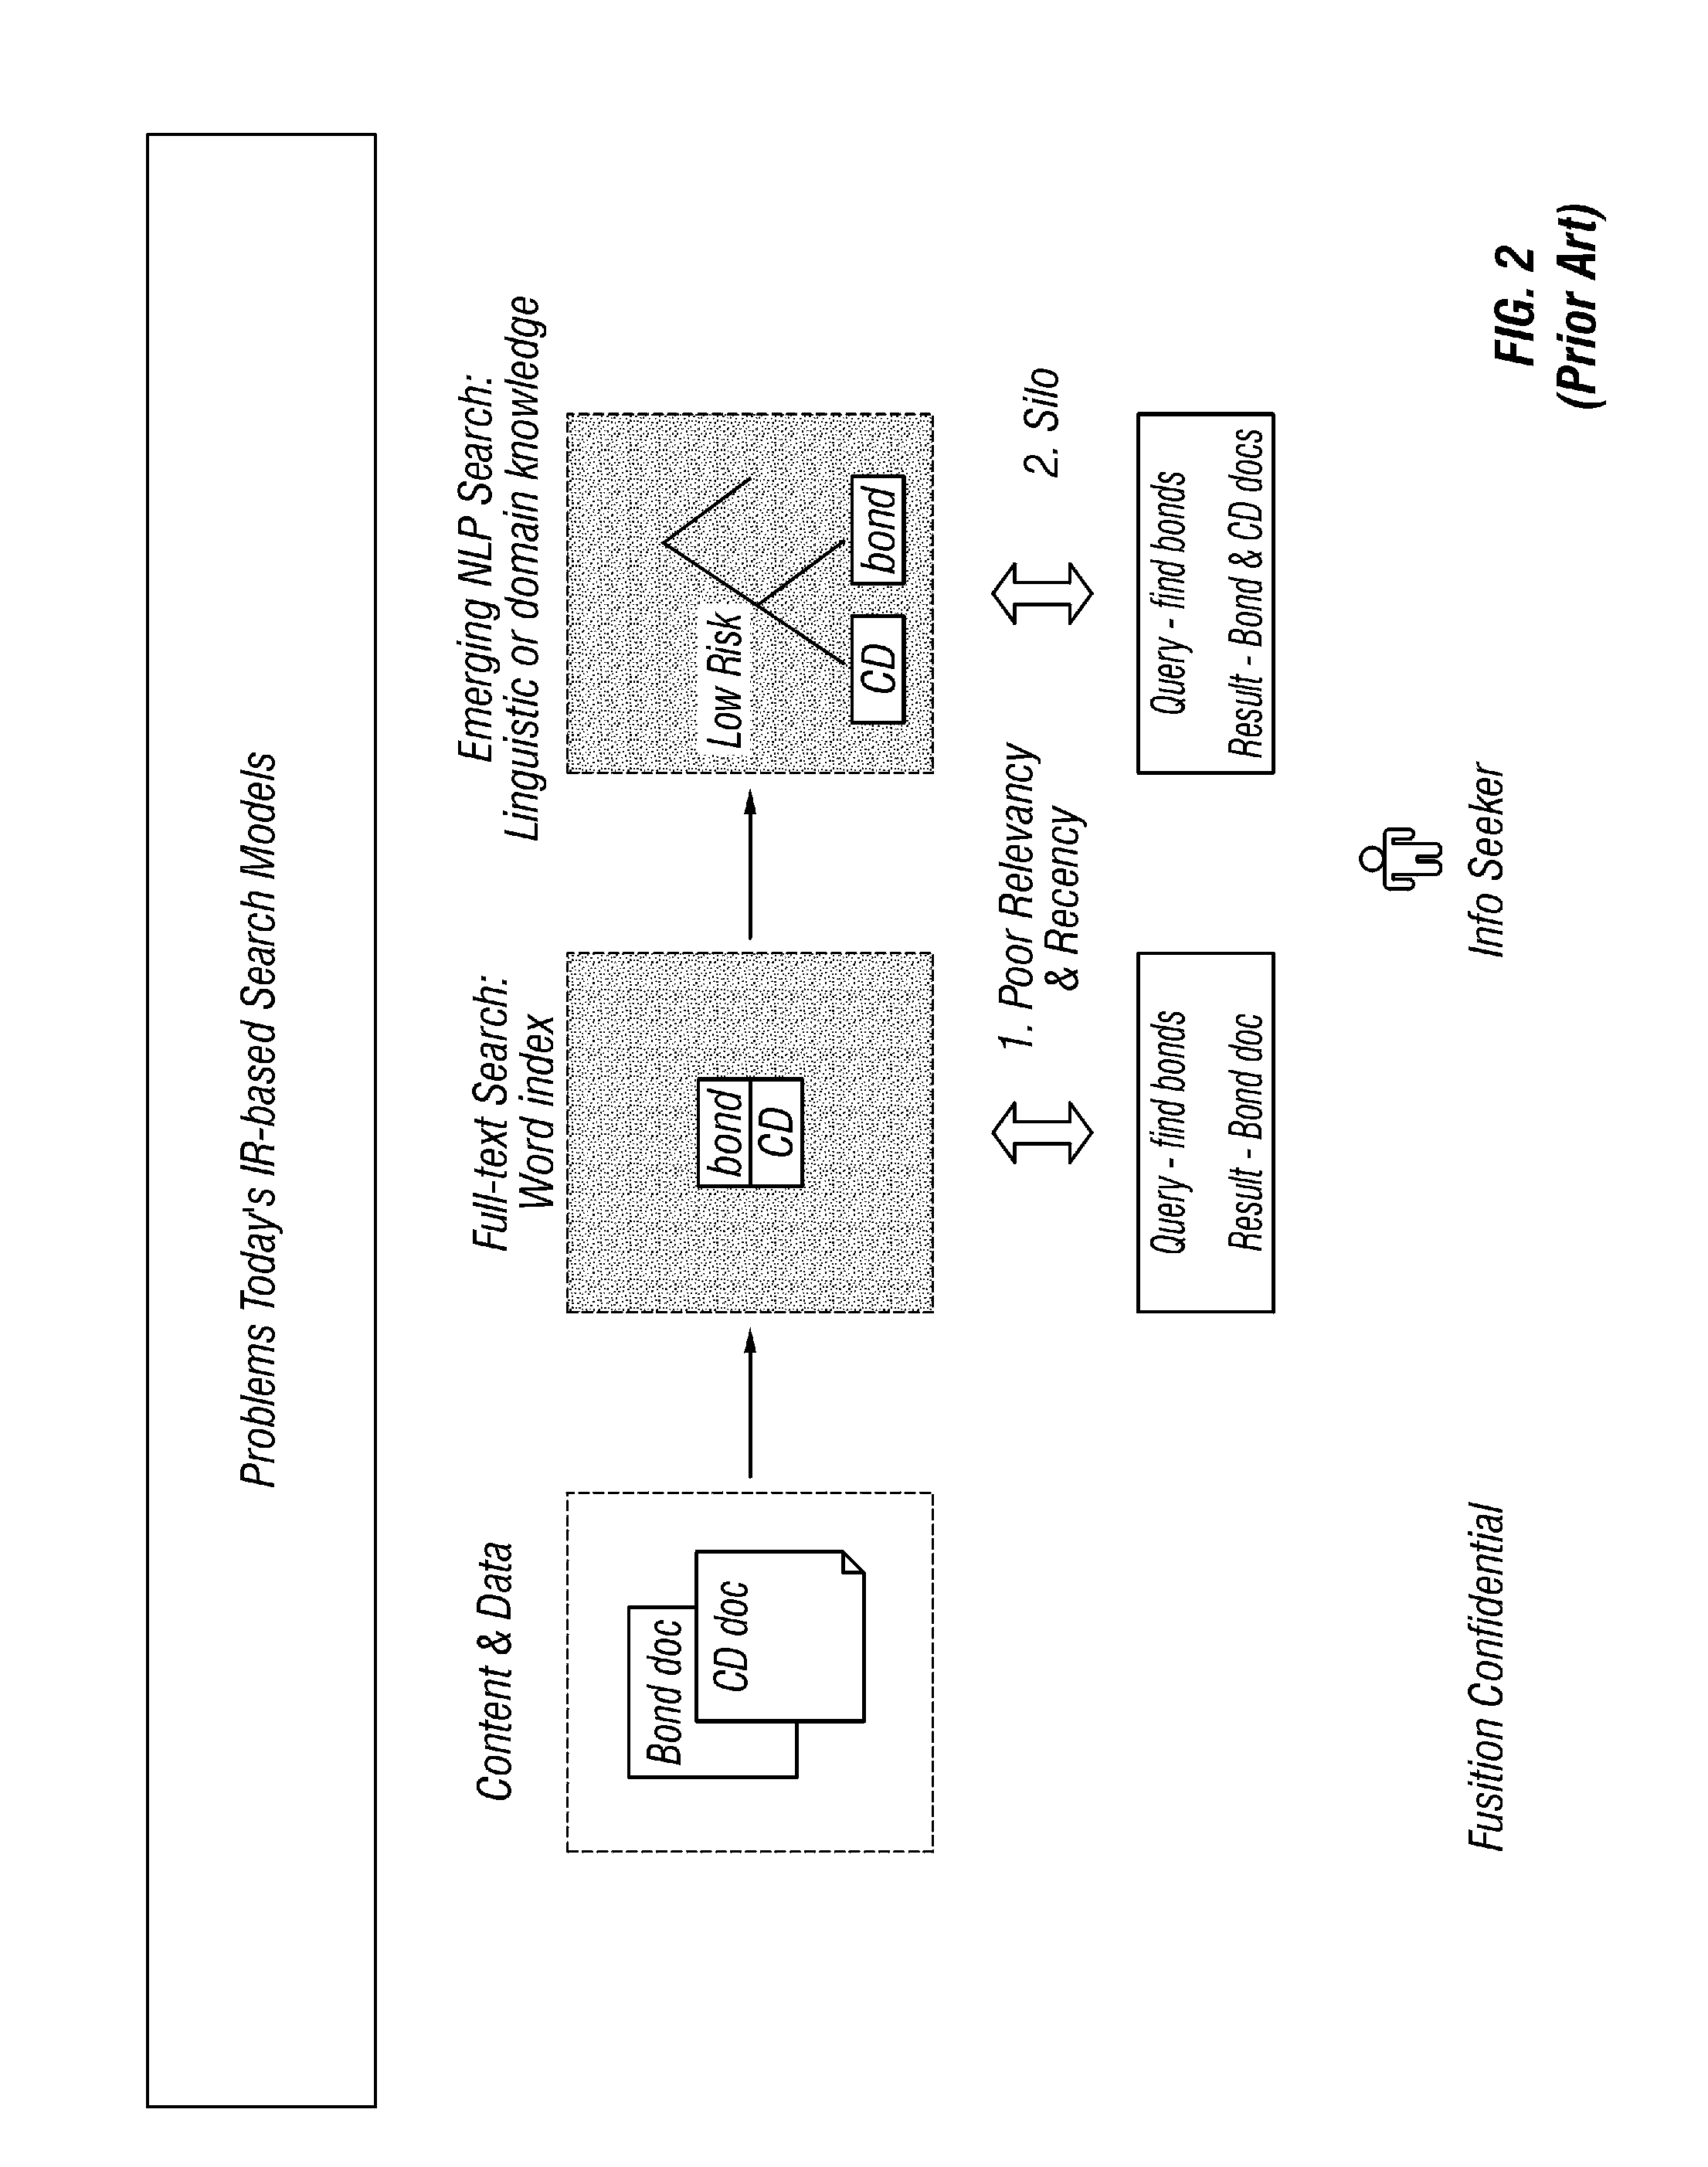 Method and apparatus for determining usefulness of a digital asset